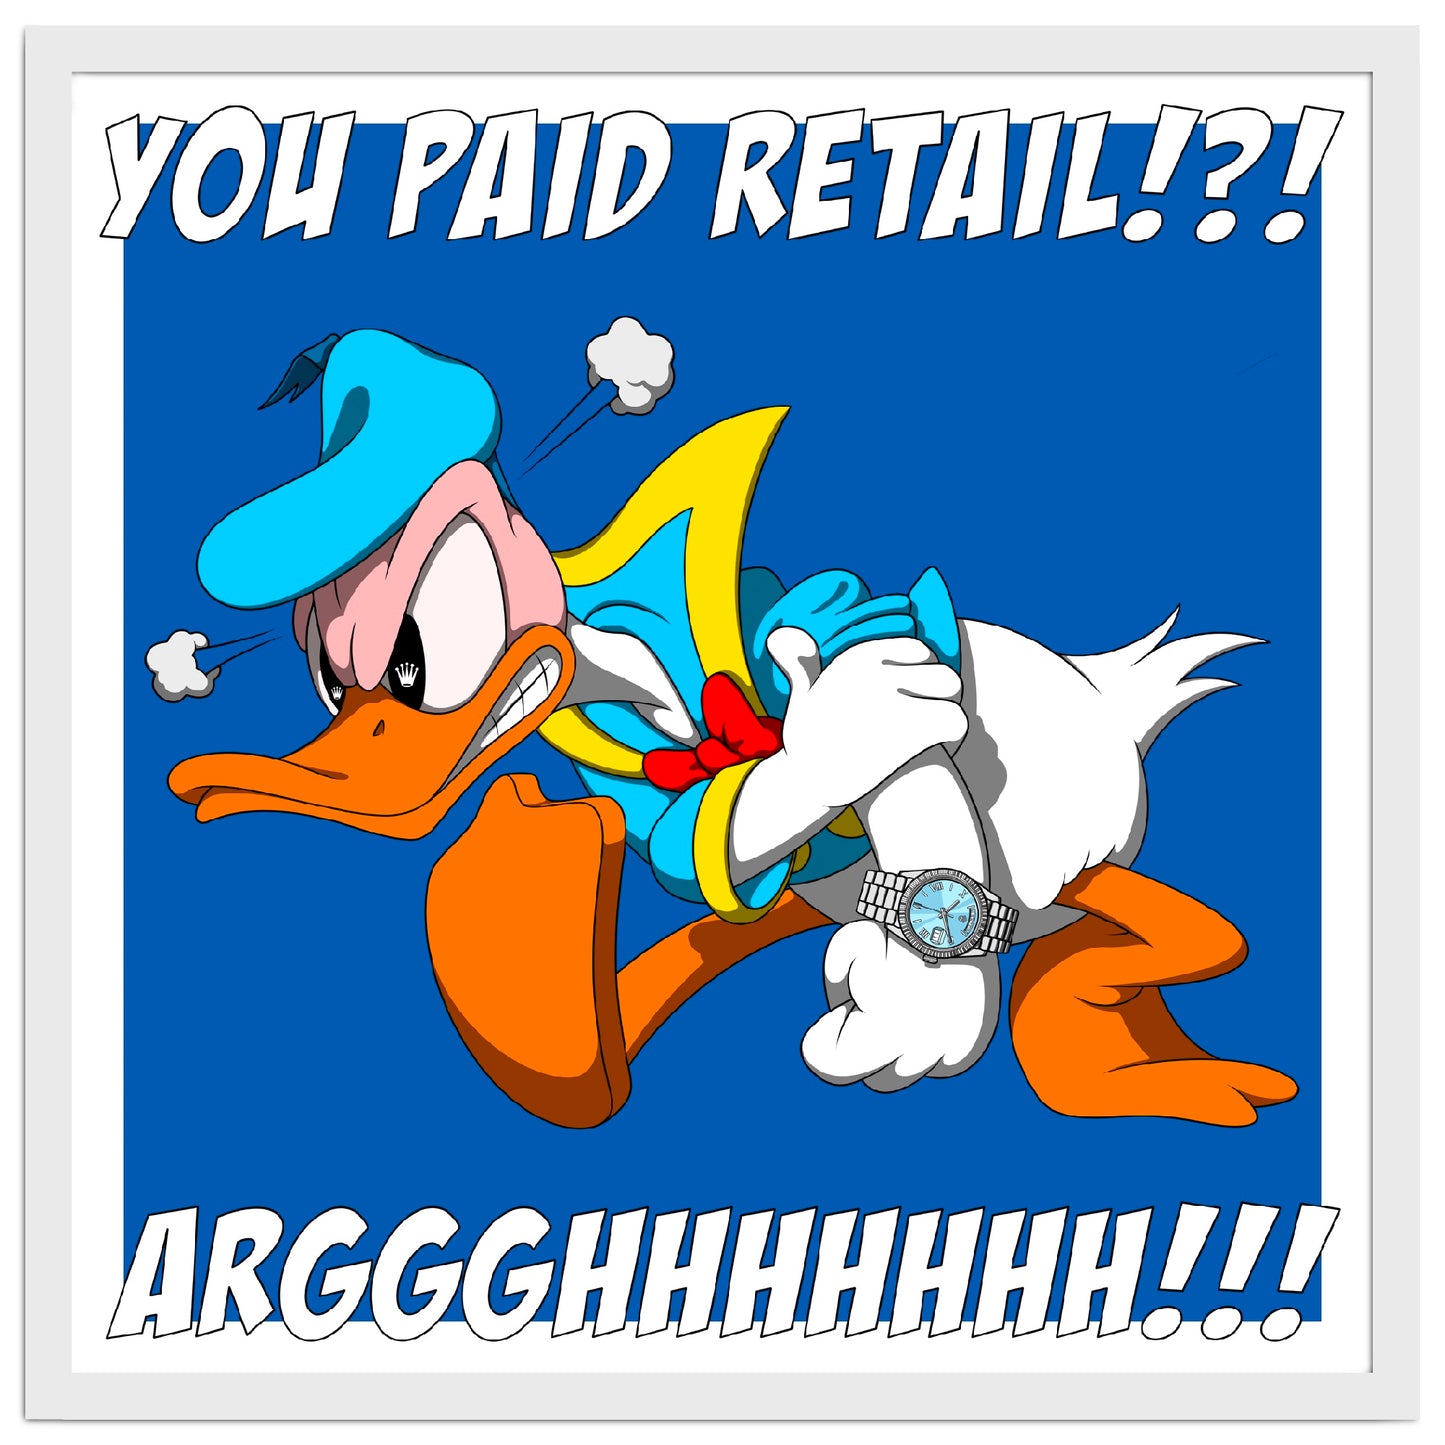 YOU PAID RETAIL!?! - Limited Edition Print